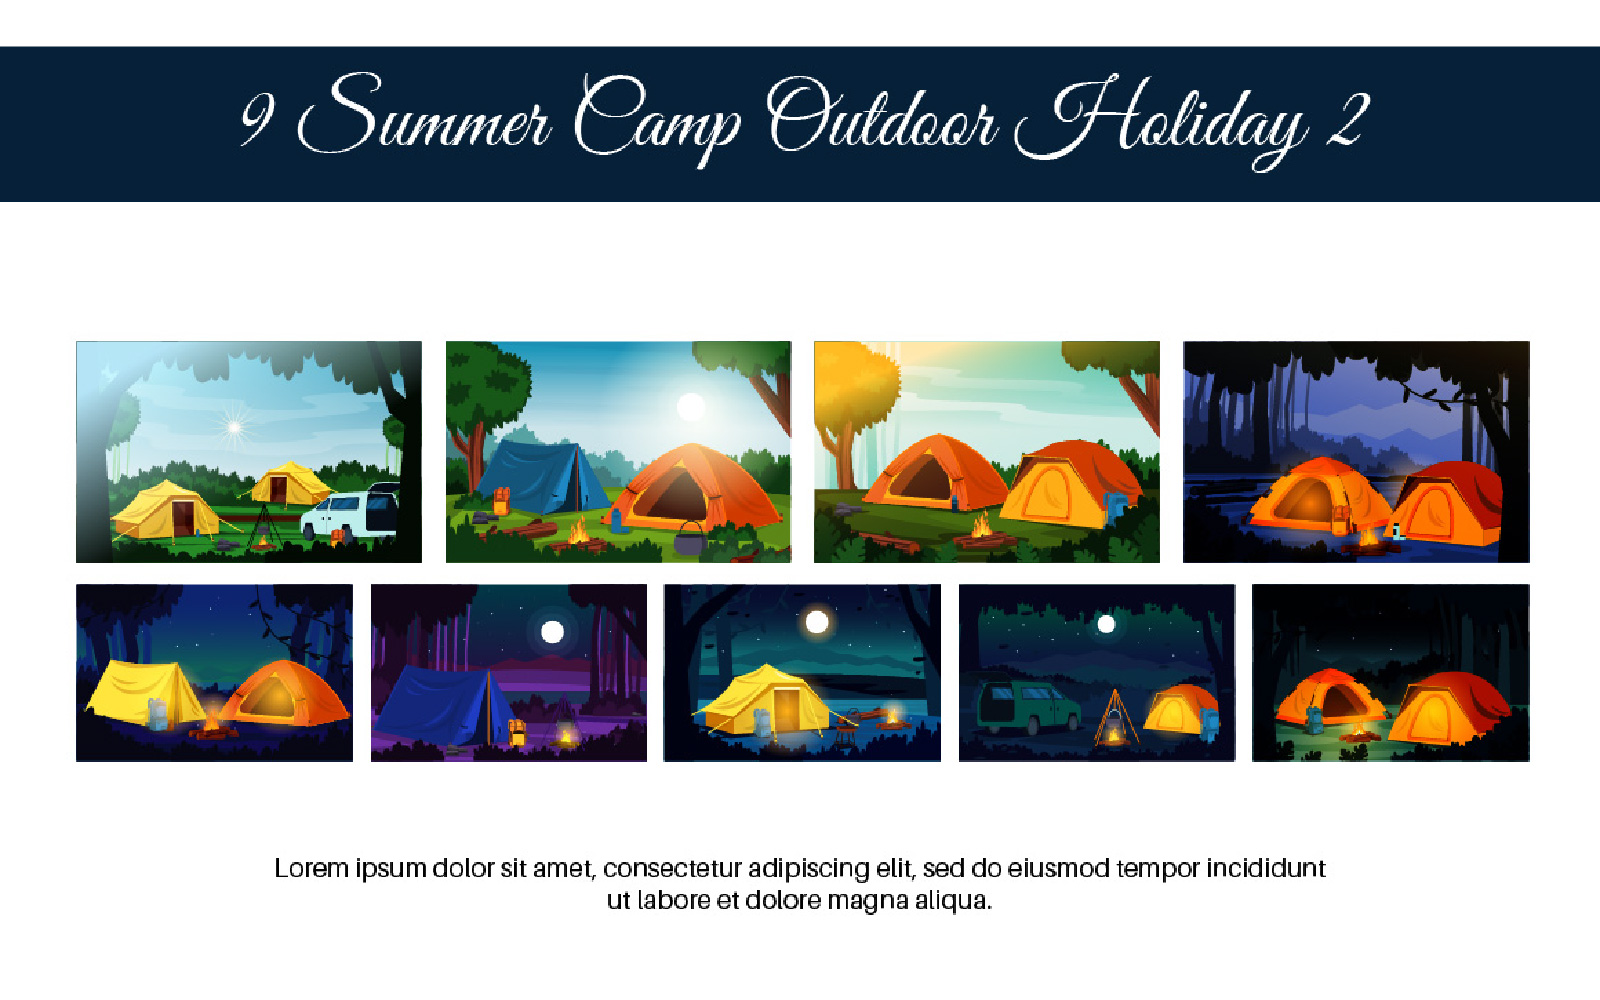 9 Summer Camp Outdoor Holiday 2